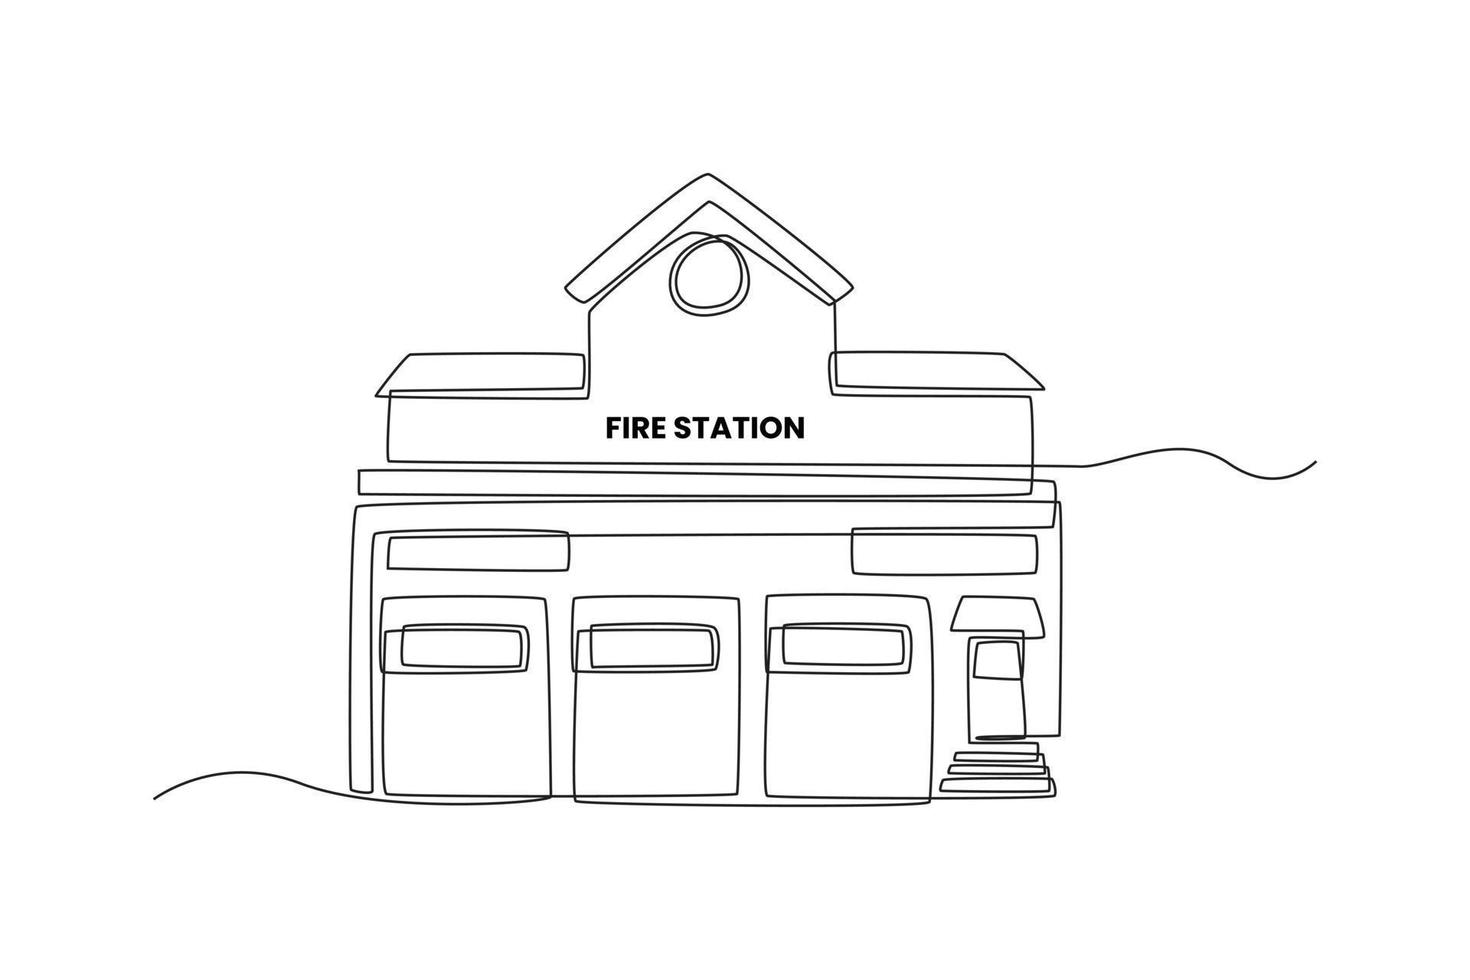 Continuous one line drawing fire station. Building and office concept. Single line draw design vector graphic illustration.